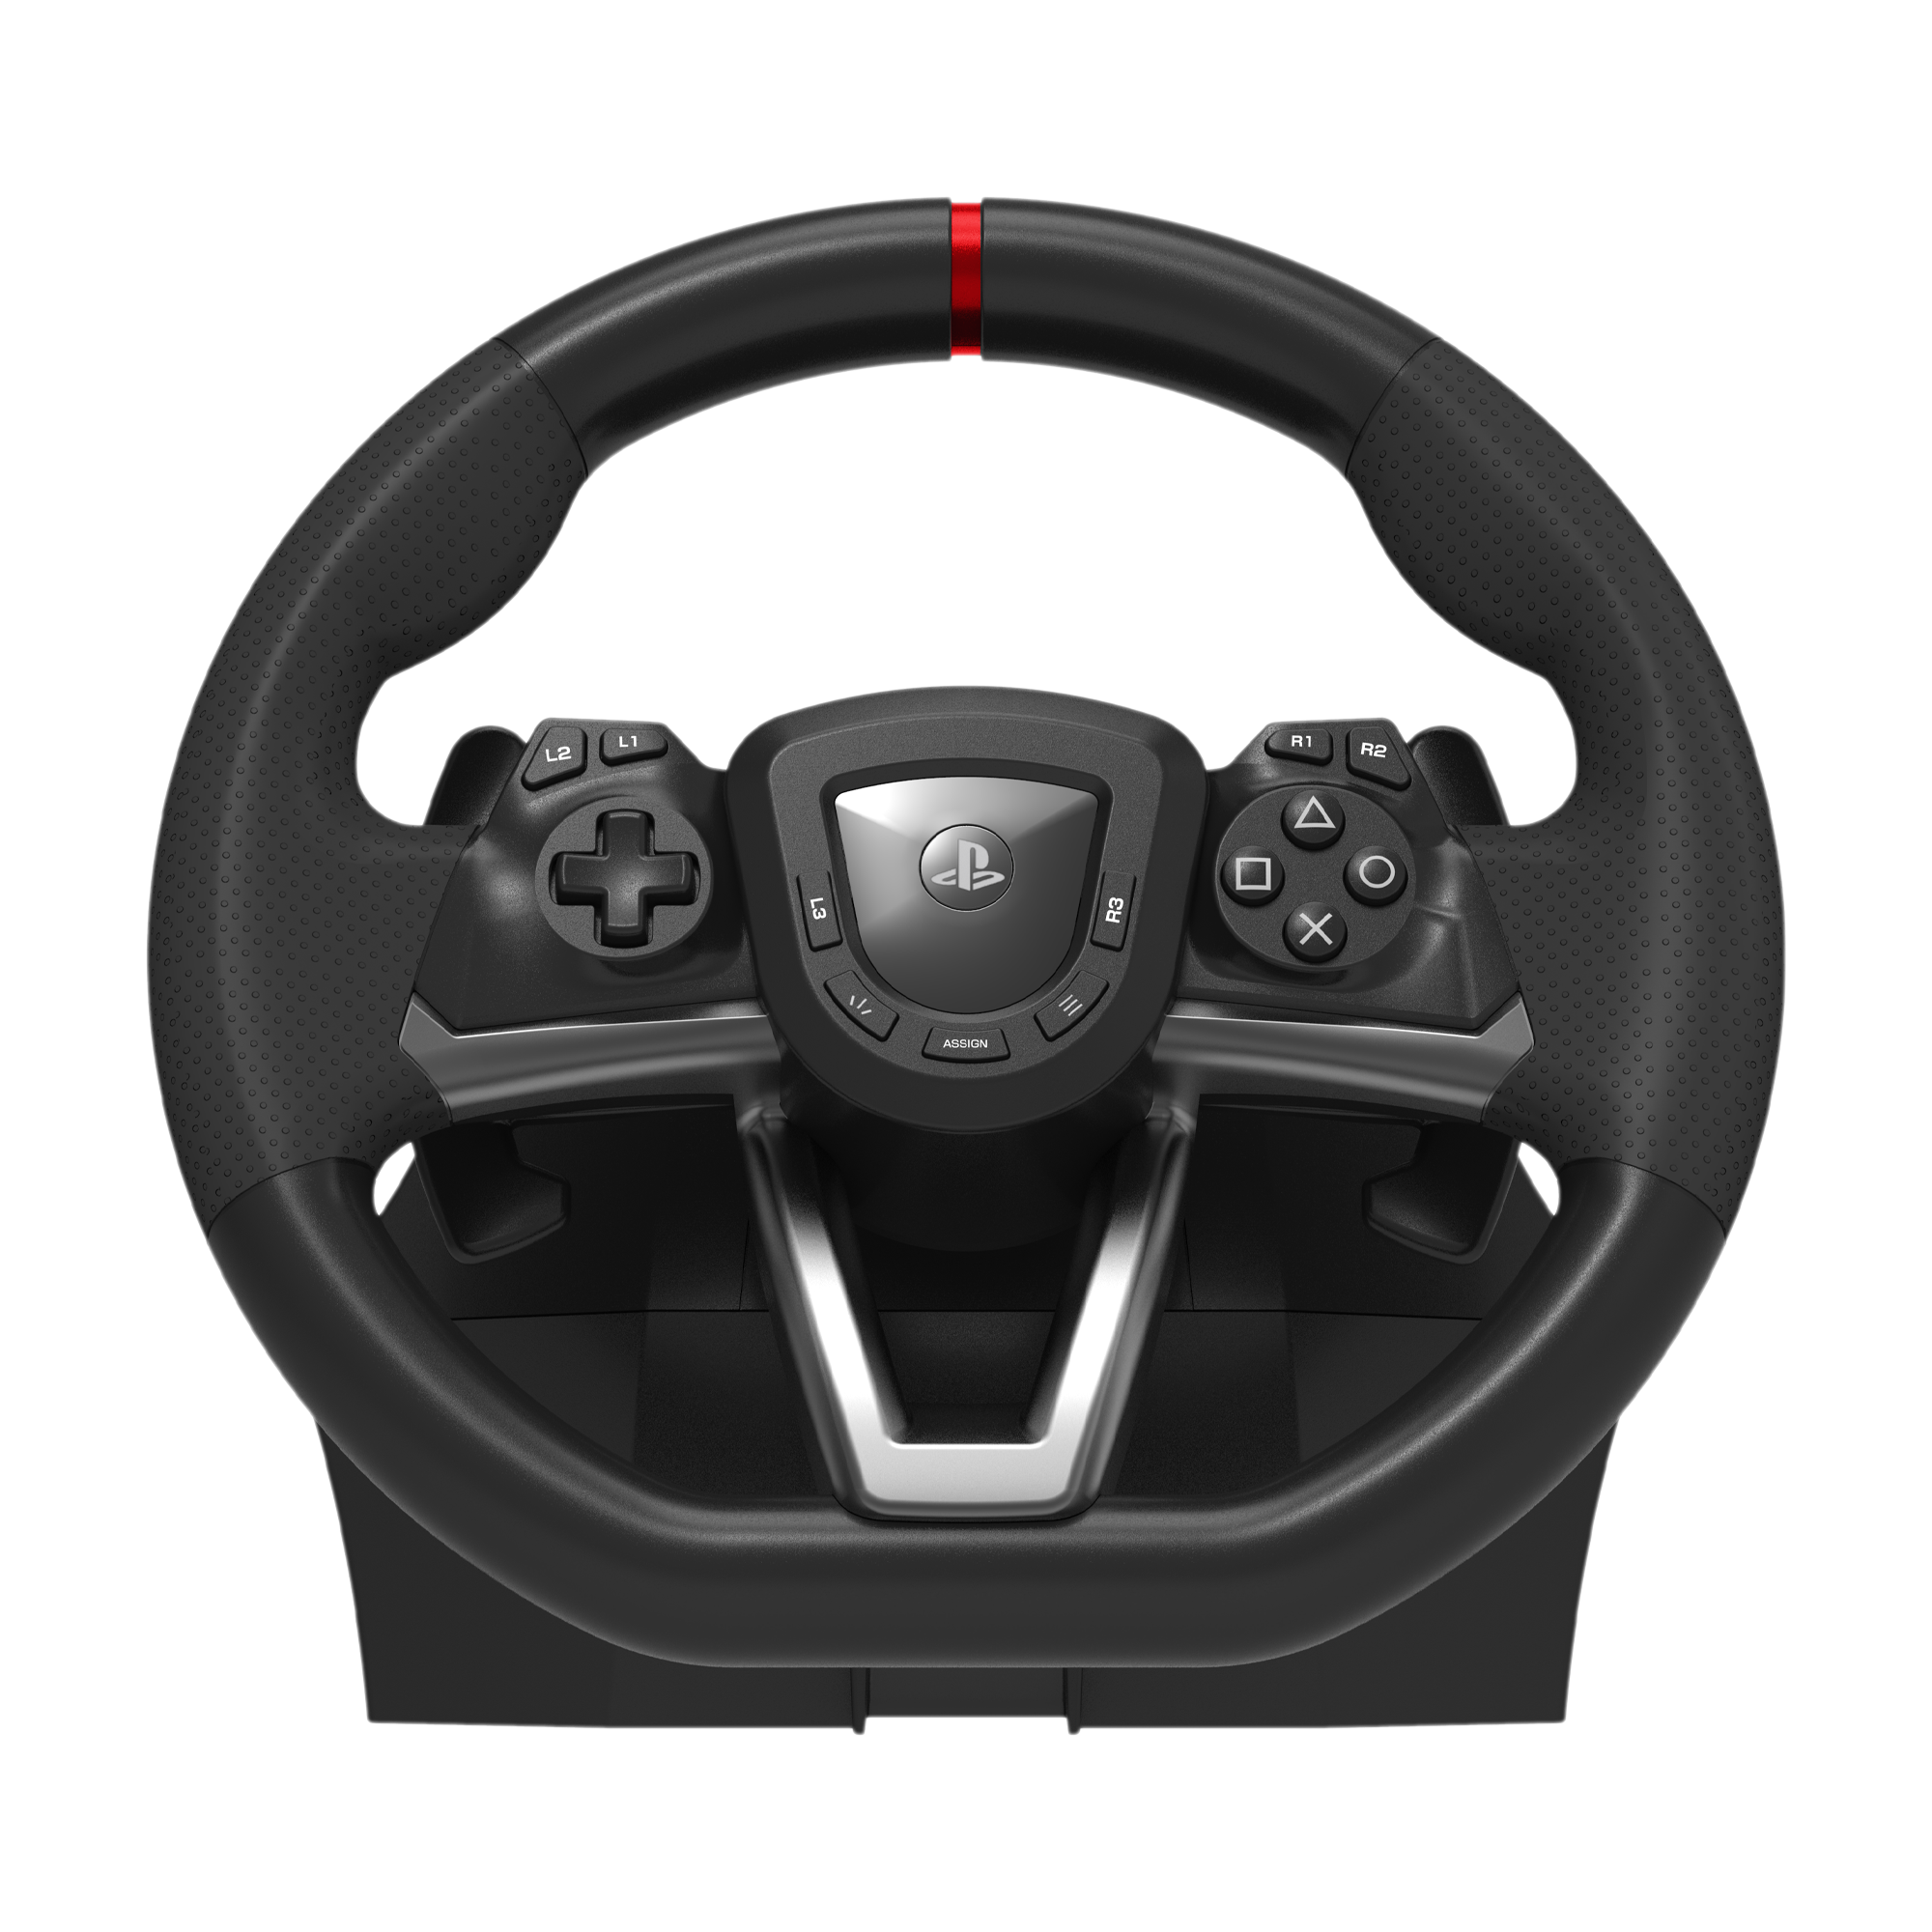 HORI Racing Wheel APEX for PlayStation 5 and PC